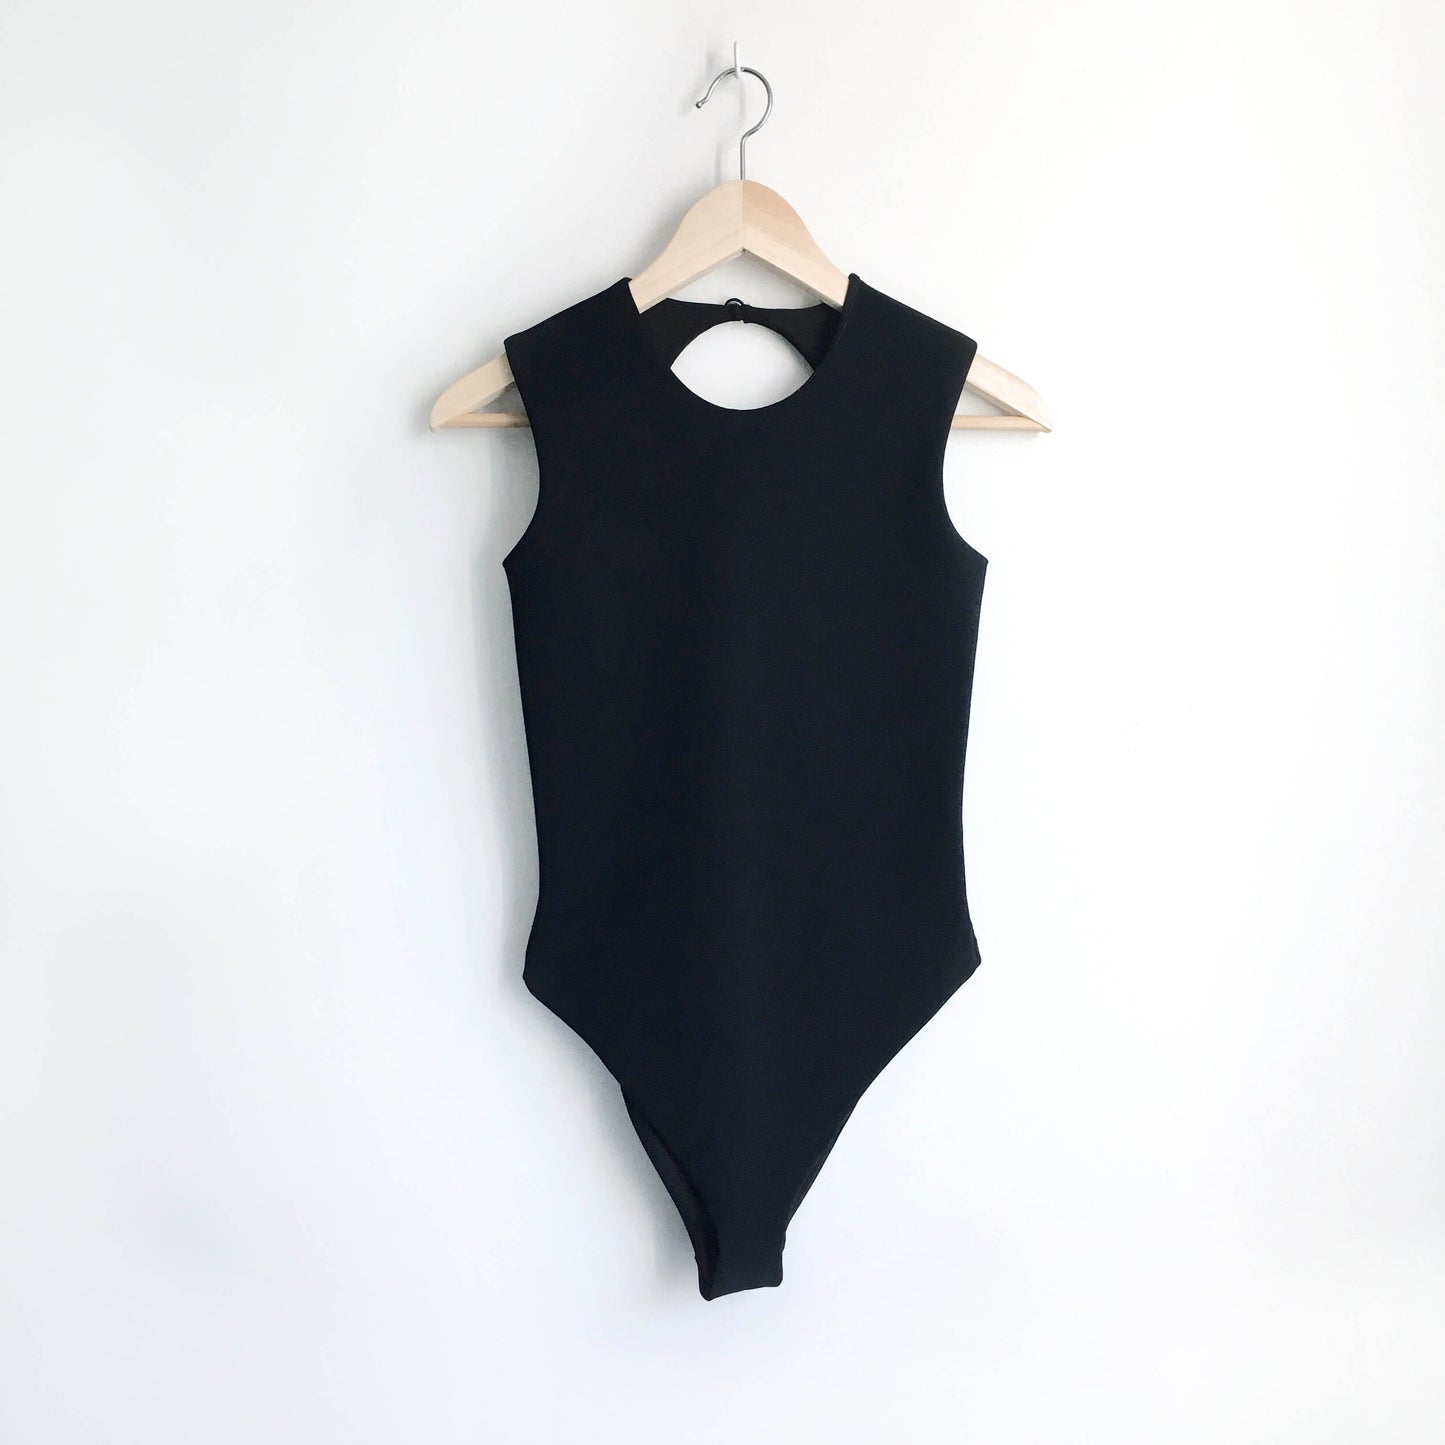 MARKOO backless body suit - size Small